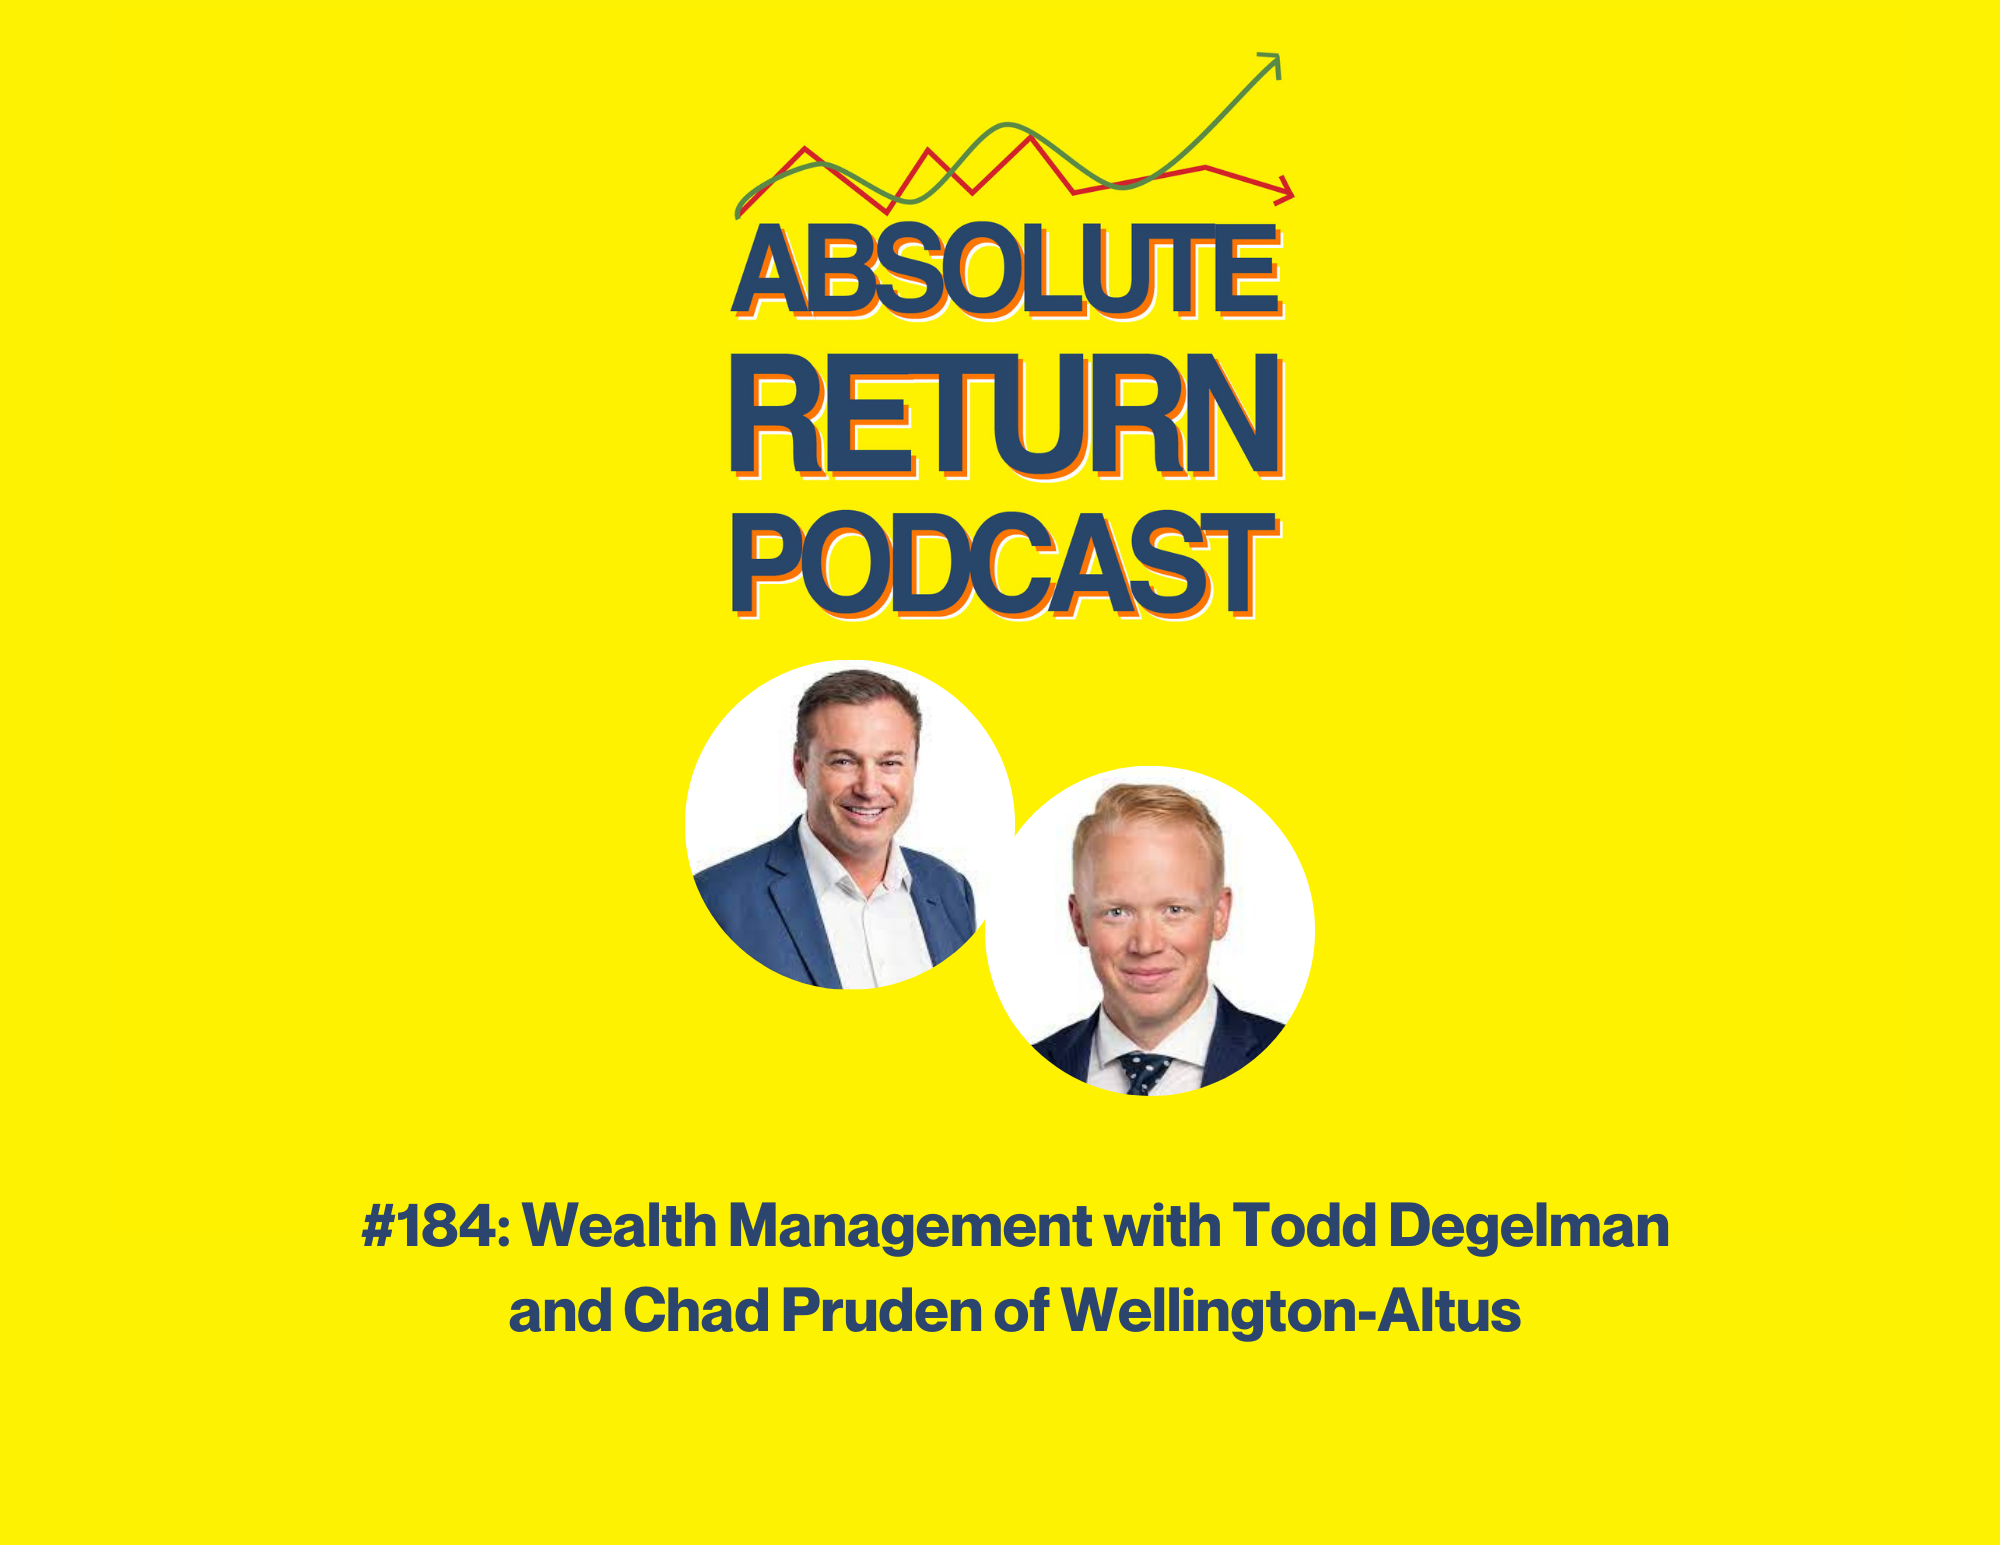 Absolute Return Podcast #184: Wealth Management with Todd Degelman and Chad Pruden of Wellington-Altus